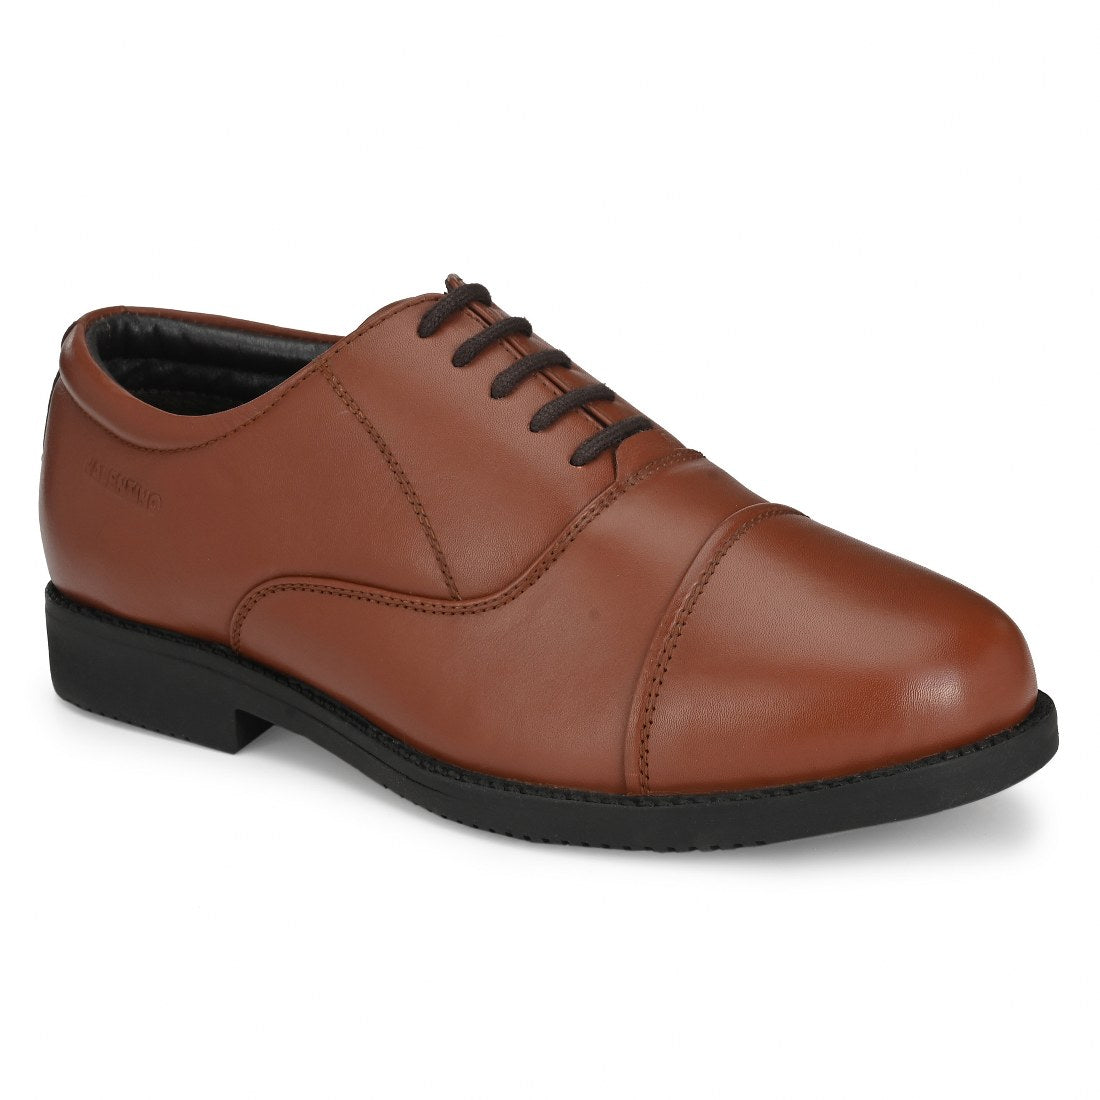 EXECUTIVE-62 MEN LEATHER TAN FORMAL LACE UP OXFORD